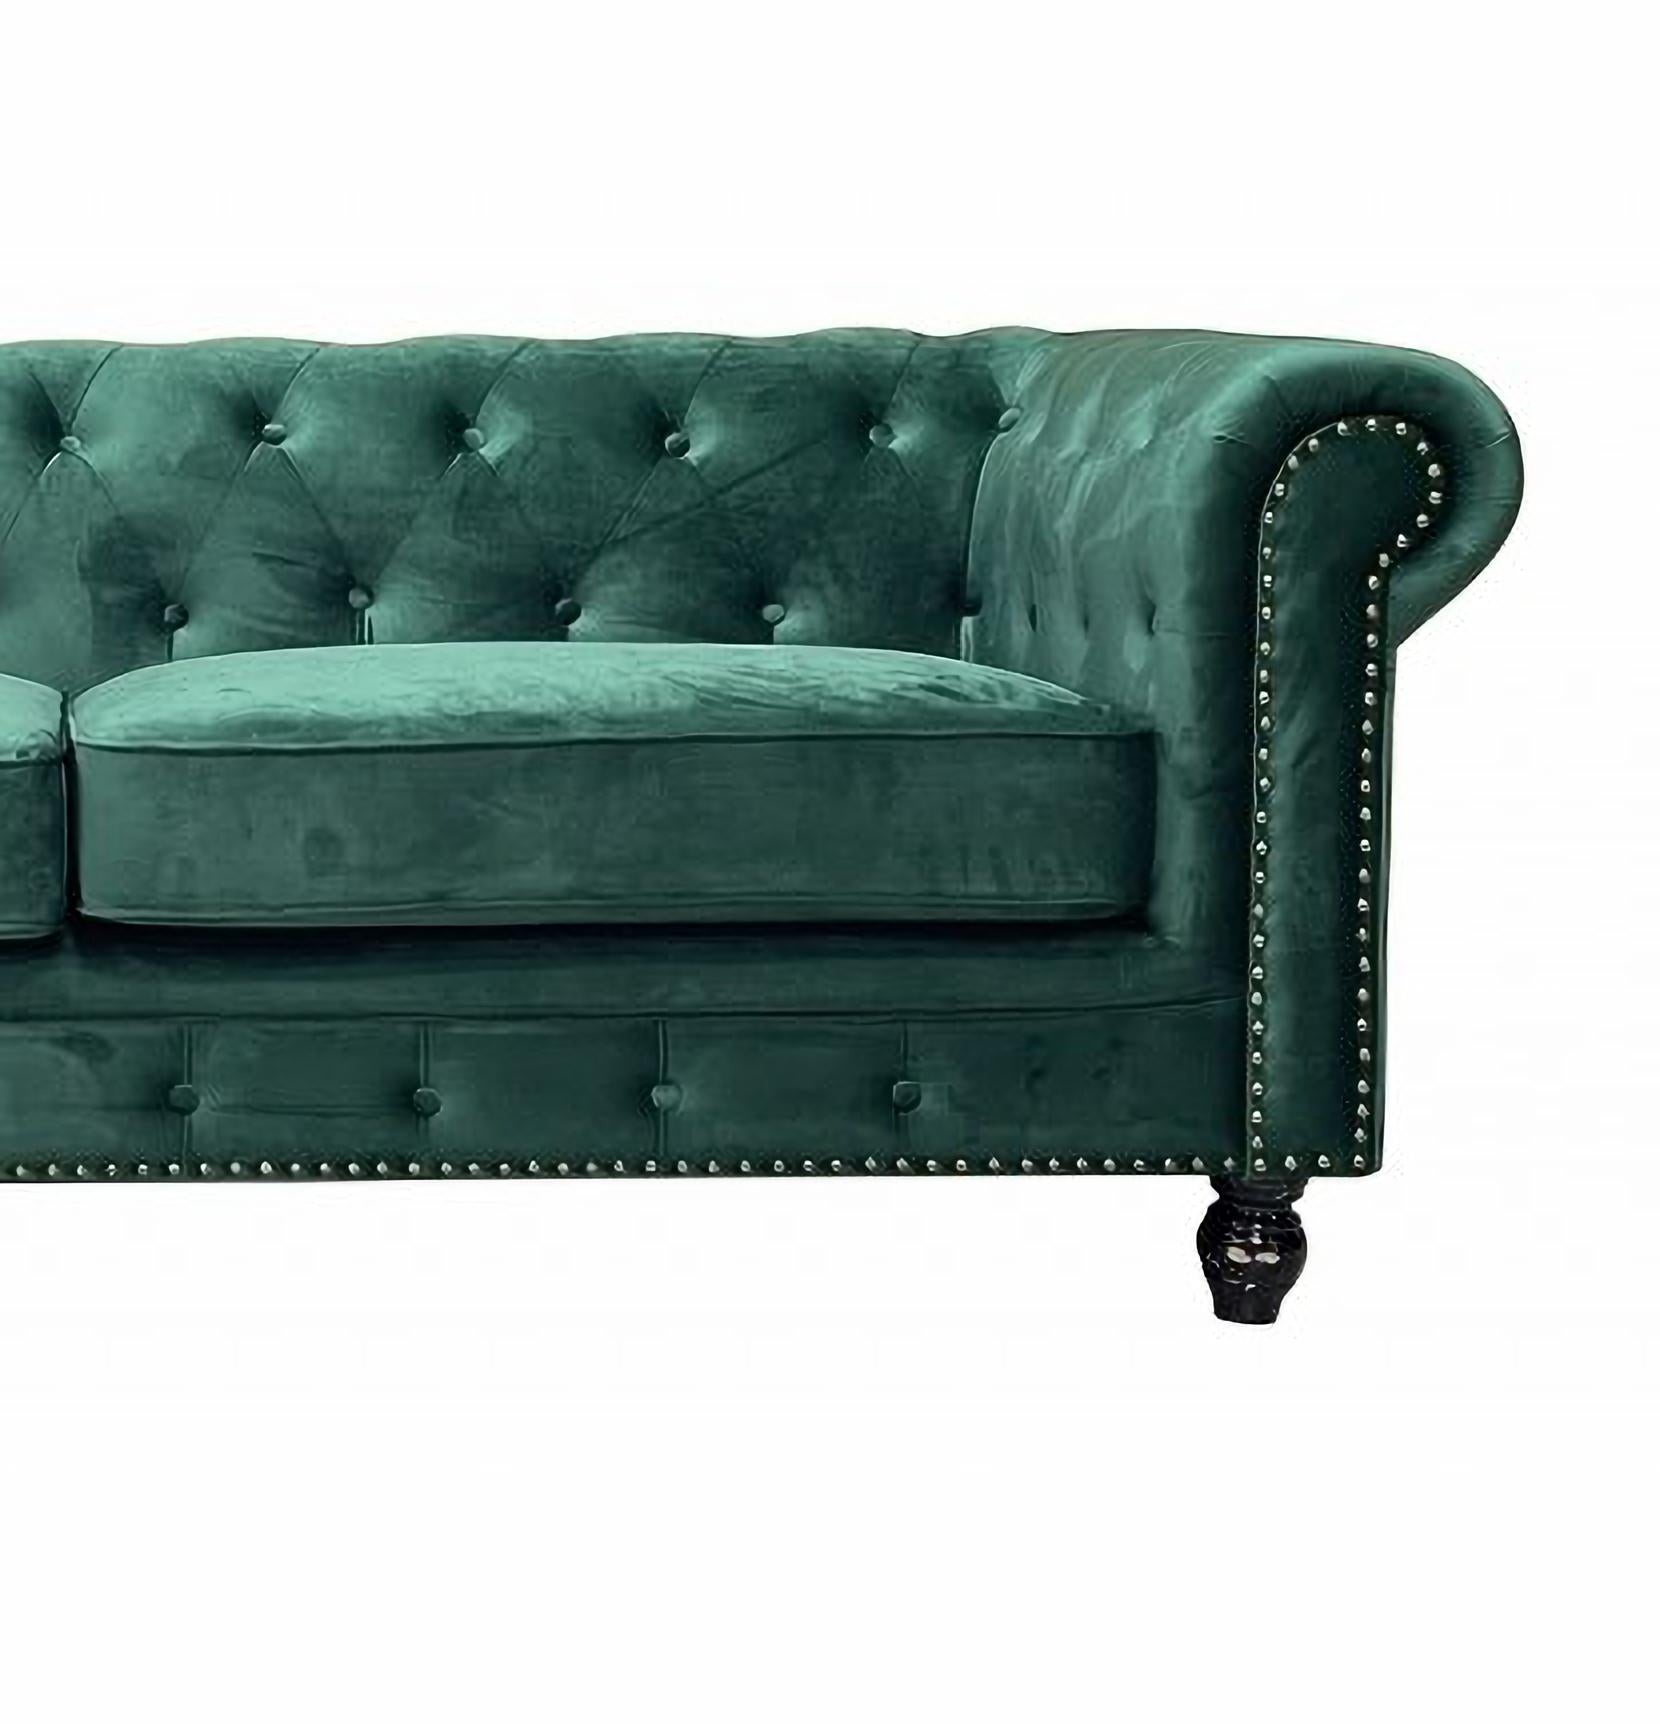 CHESTER PREMIUM 3-seater sofa, green velvet upholstery

-Design sofa, 3 seats.

-Made with a solid wooden structure.

-High density polyurethane foam.

-Upholstered in navy blue velvet fabric

-2-seater sofa to match, optional

-Other